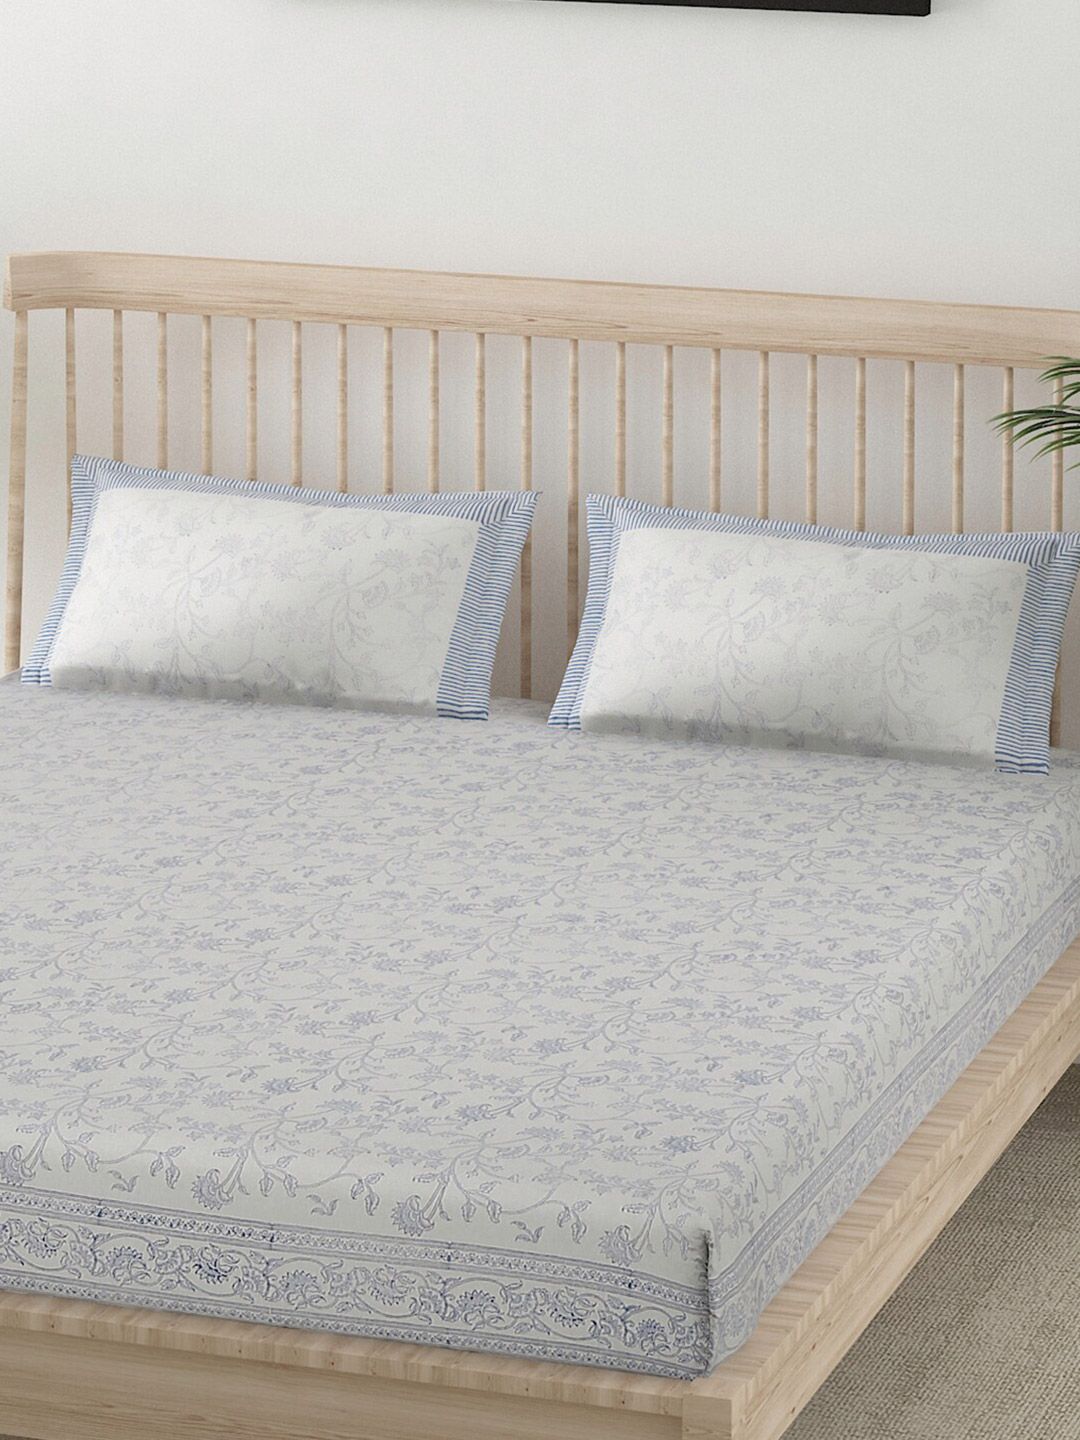 EK BY EKTA KAPOOR White & Blue Floral 120 TC King Bedsheet with 2 Pillow Covers Price in India